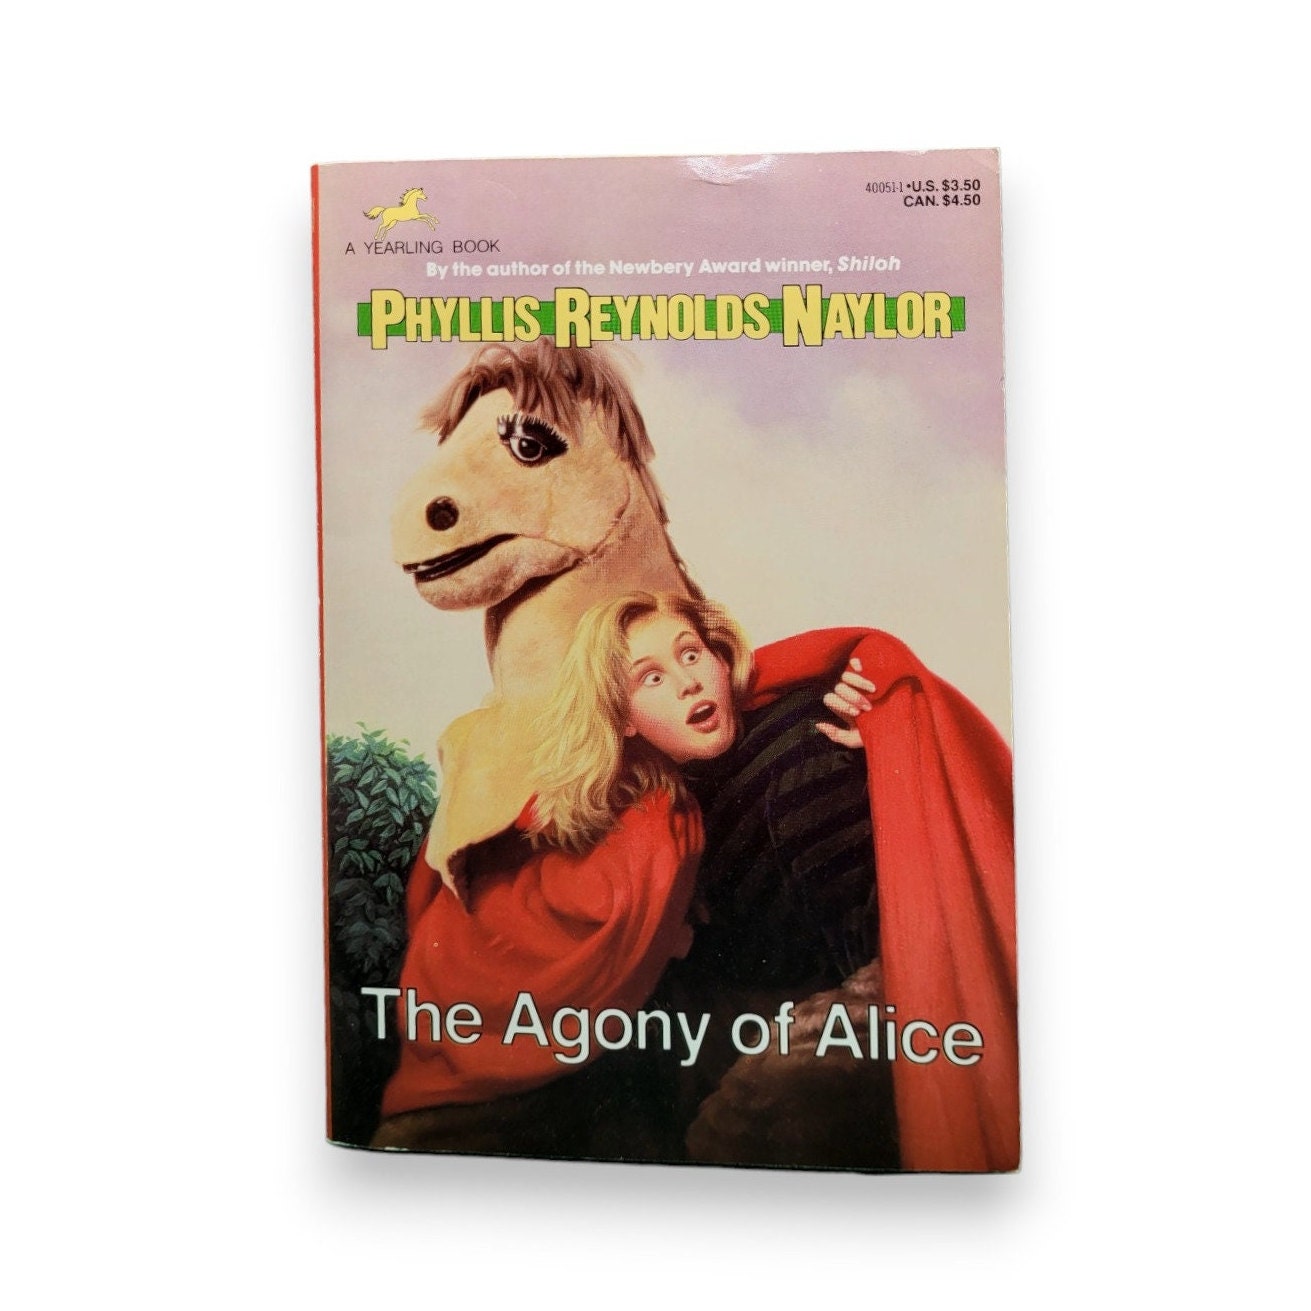 The Agony of Alice by Phyllis Reynolds Naylor 1988